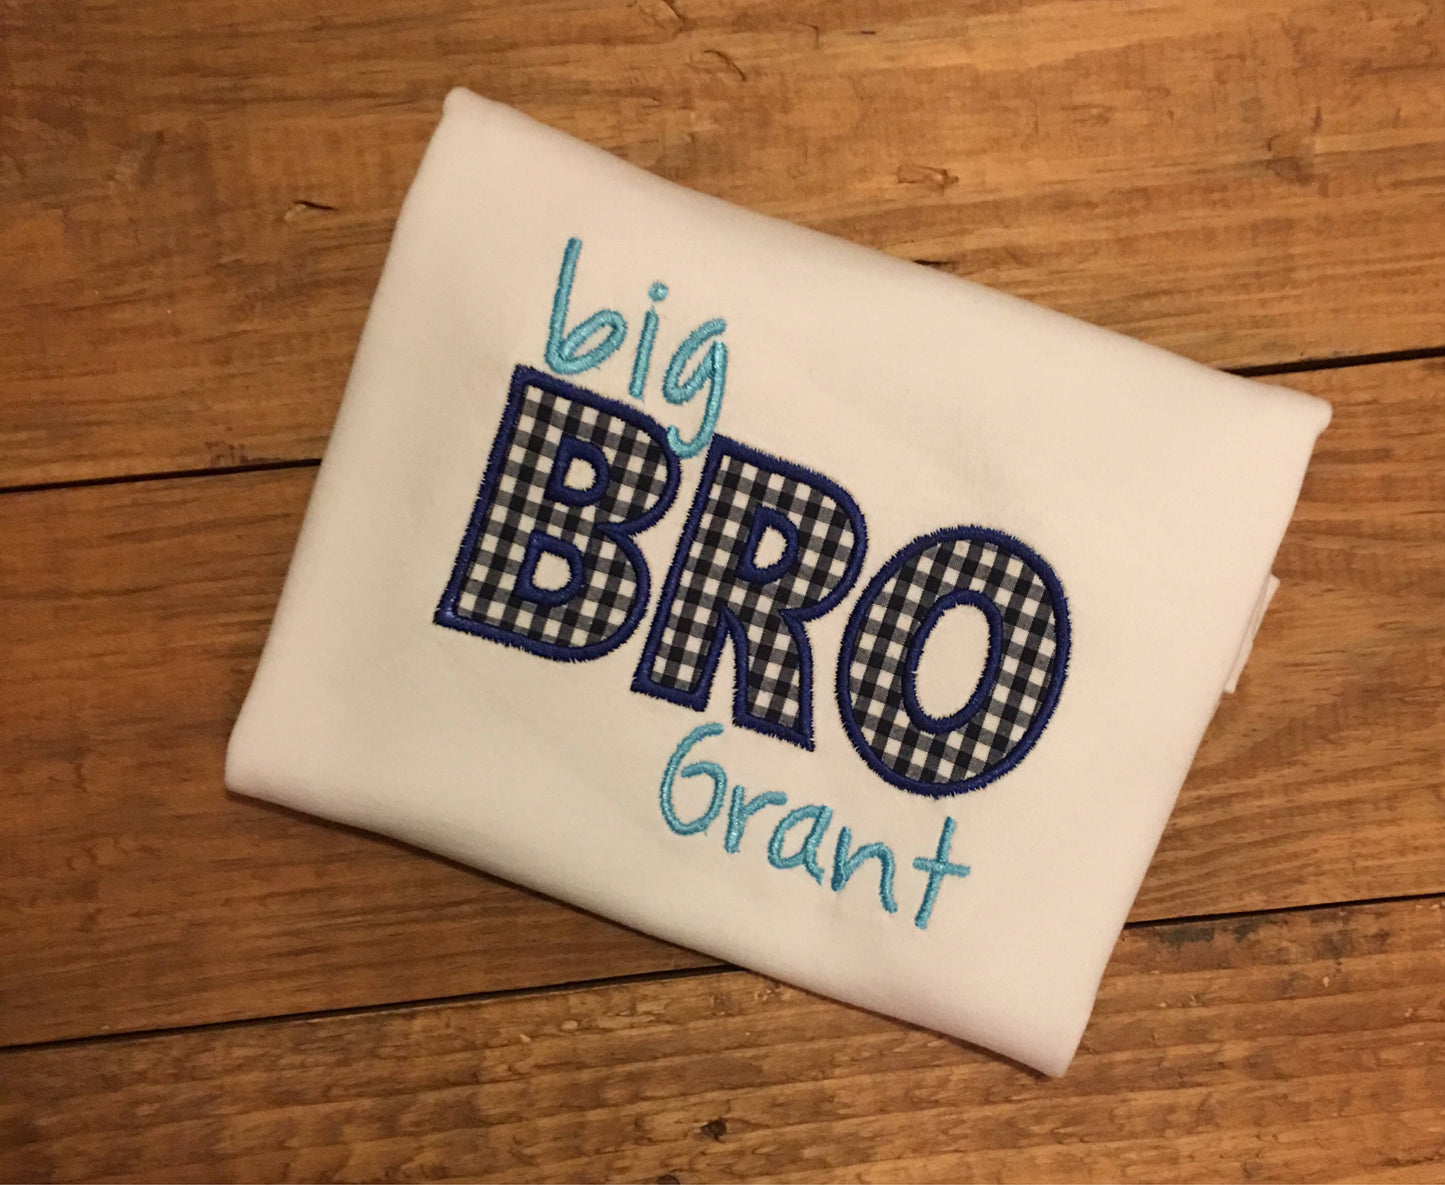 Big Brother Shirt, im going to be a big brother shirt, pregnancy announcemet shirt for siblings, big bro shirt